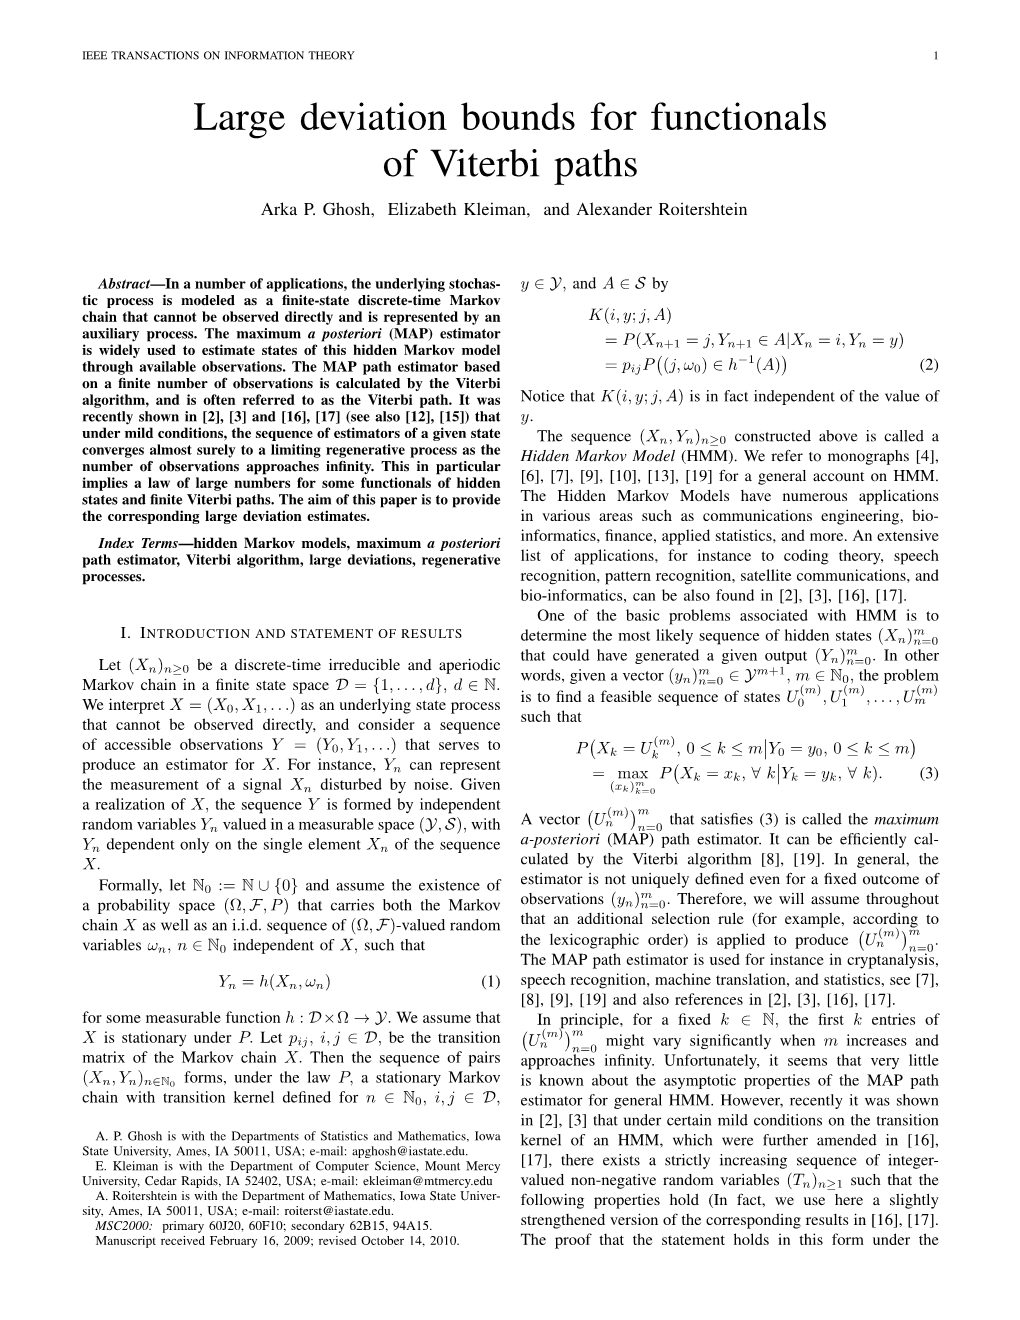 Large Deviation Bounds for Functionals of Viterbi Paths Arka P